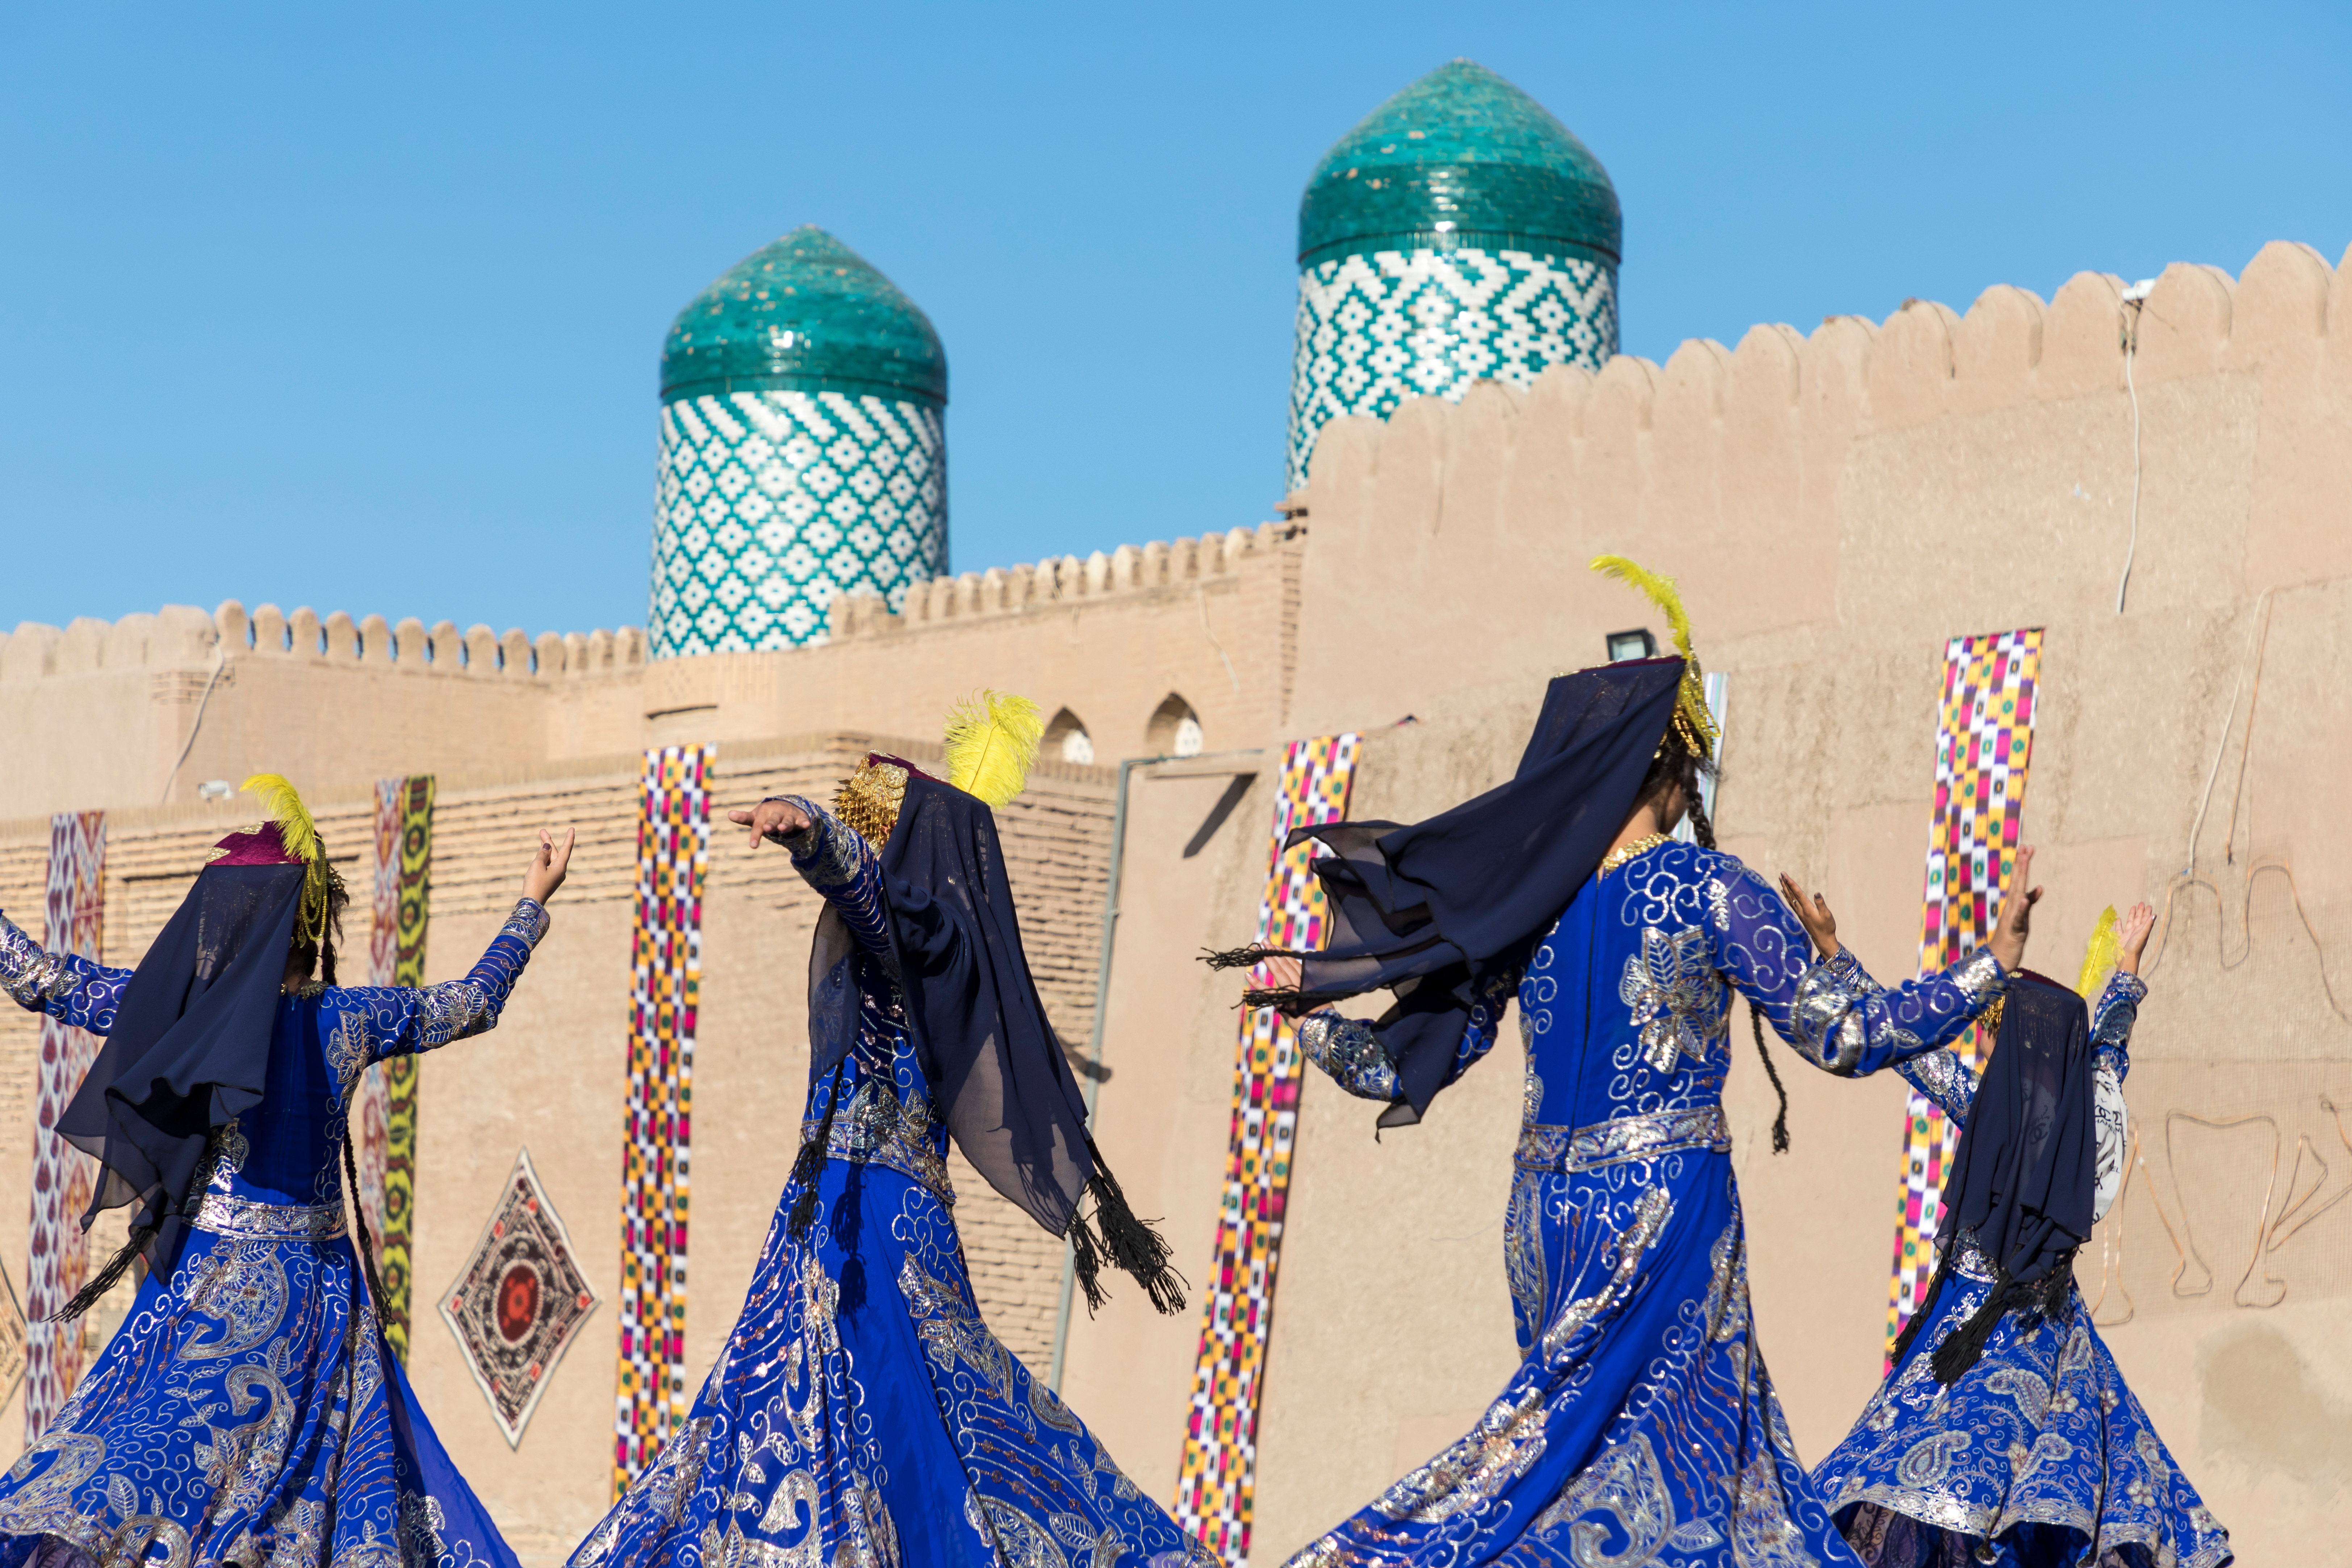 Traditional folk dancers at local festival in Khiva – © Curioso.Photography / Shutterstock